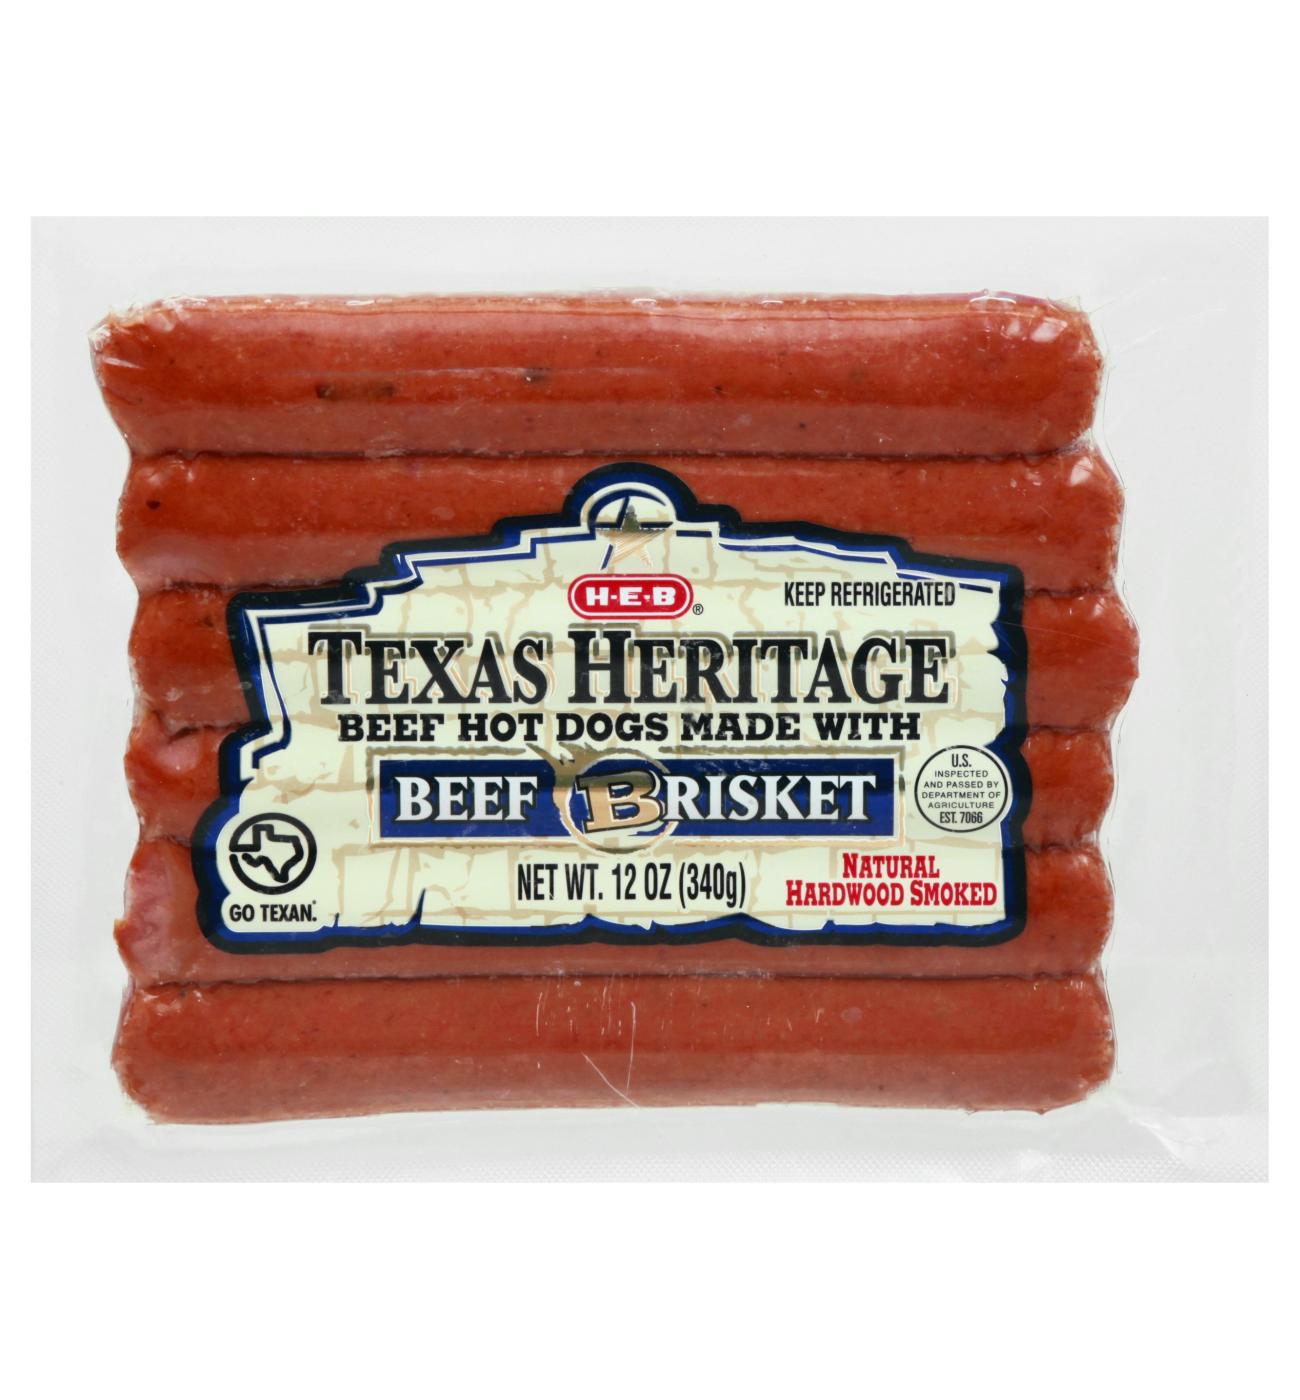 H-E-B Texas Heritage Beef Brisket Hot Dogs; image 1 of 3